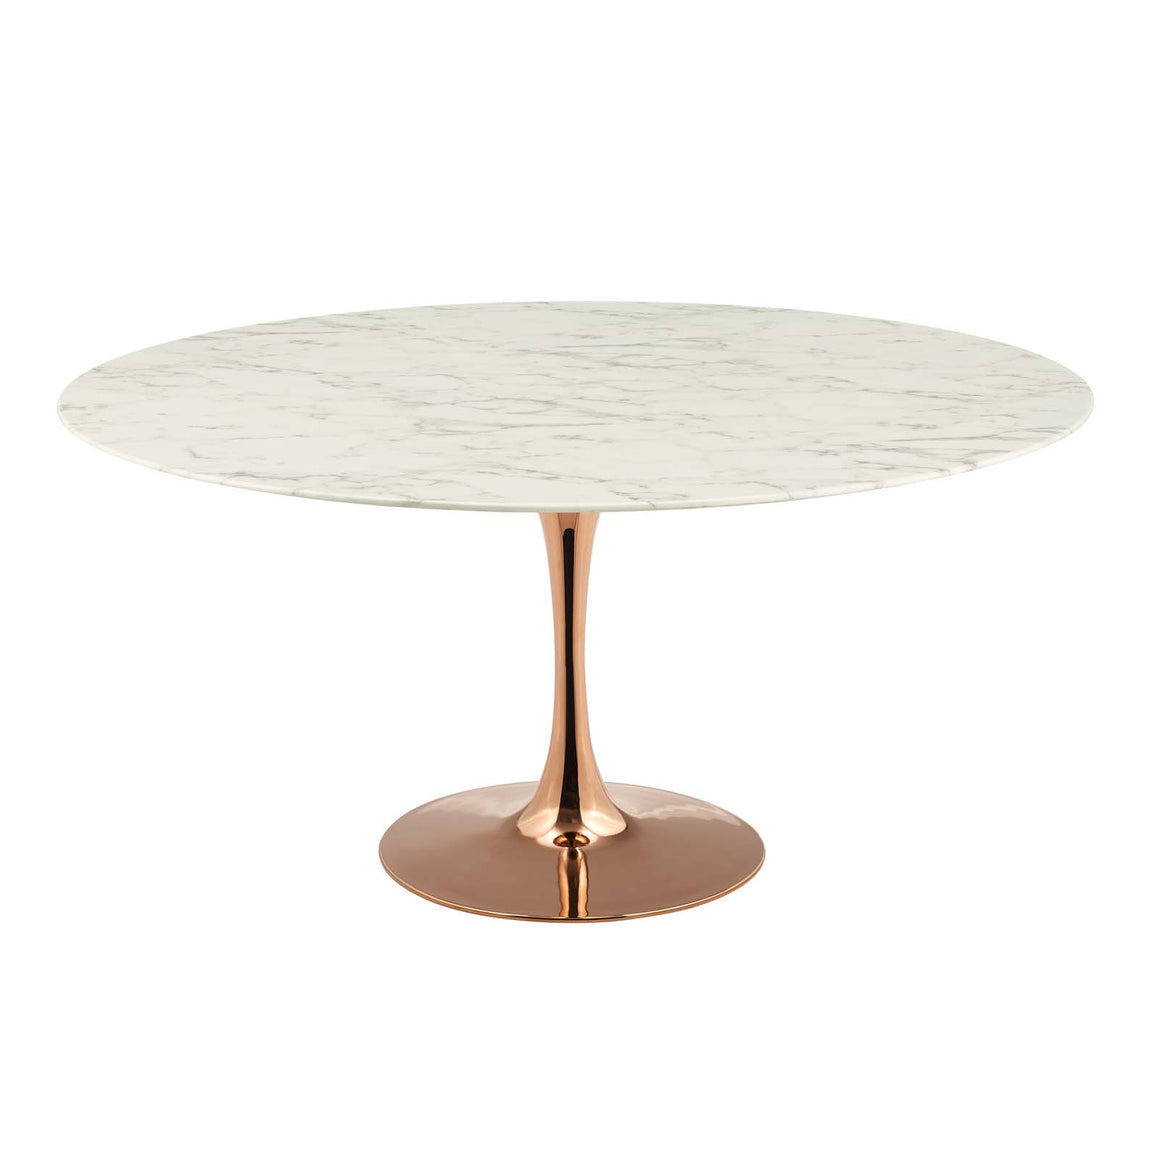 Lippa 60" Round Artificial Marble Dining Table Rose White